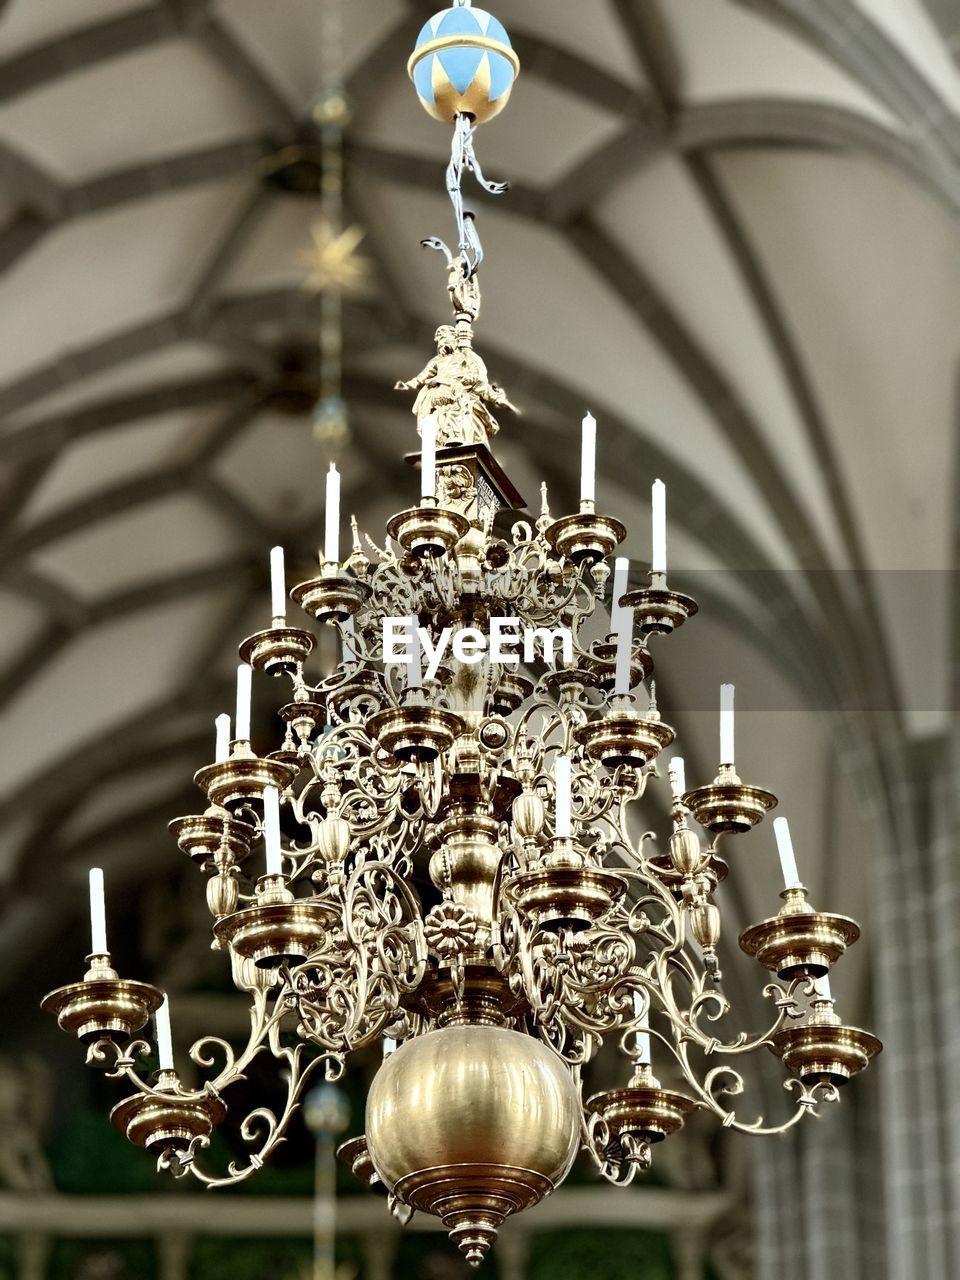 chandelier, light fixture, hanging, lighting equipment, lighting, ceiling, architecture, decoration, no people, low angle view, built structure, indoors, ornate, pendant light, wealth, focus on foreground, luxury, illuminated, building, religion, metal, spirituality, close-up, pattern, belief